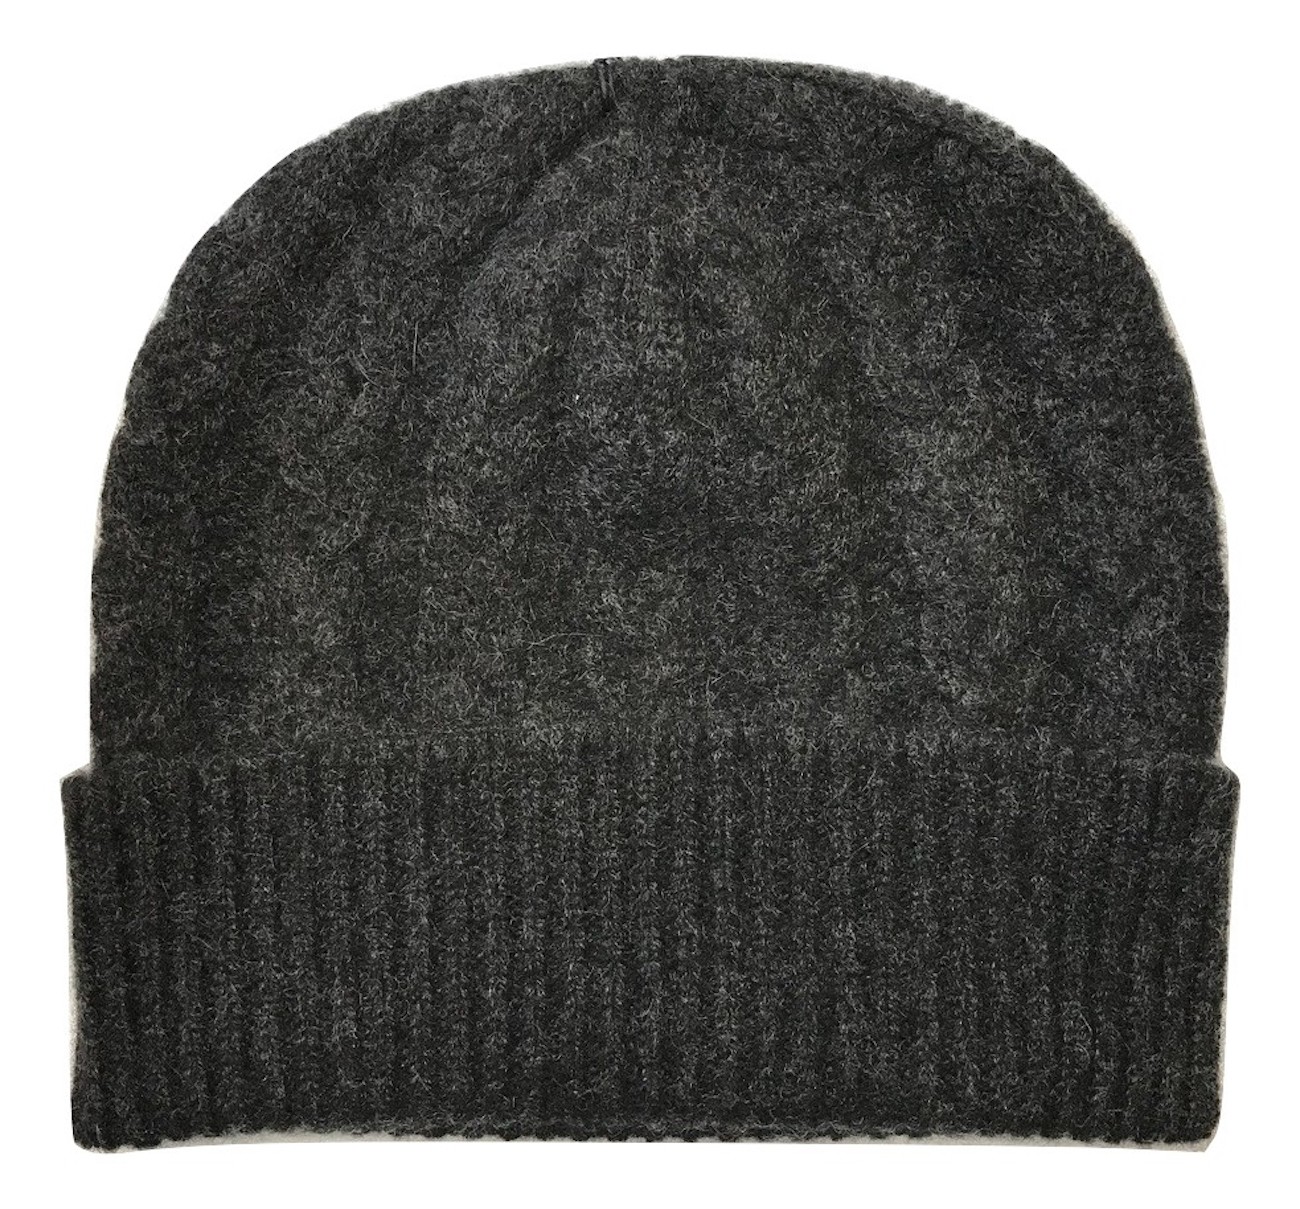 The Scarf Company Charcoal Cashmere 3ply Cable Knit Beanie Hat